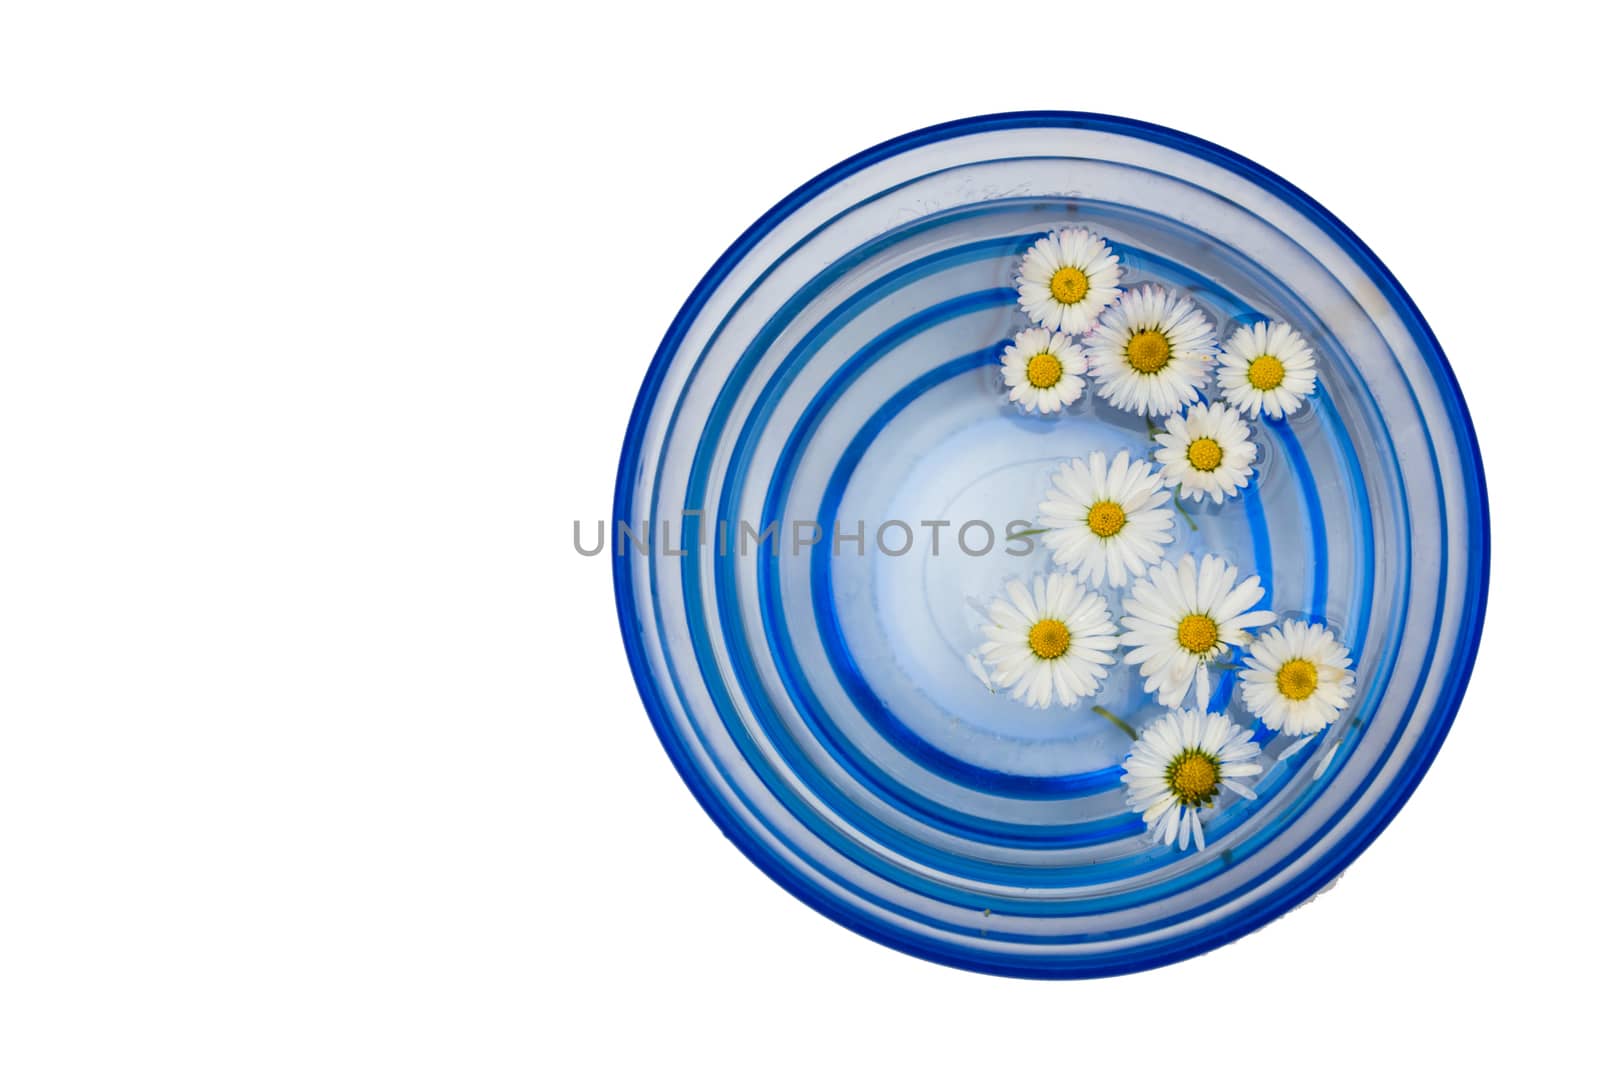 A blue glass vase filled with water and daisies